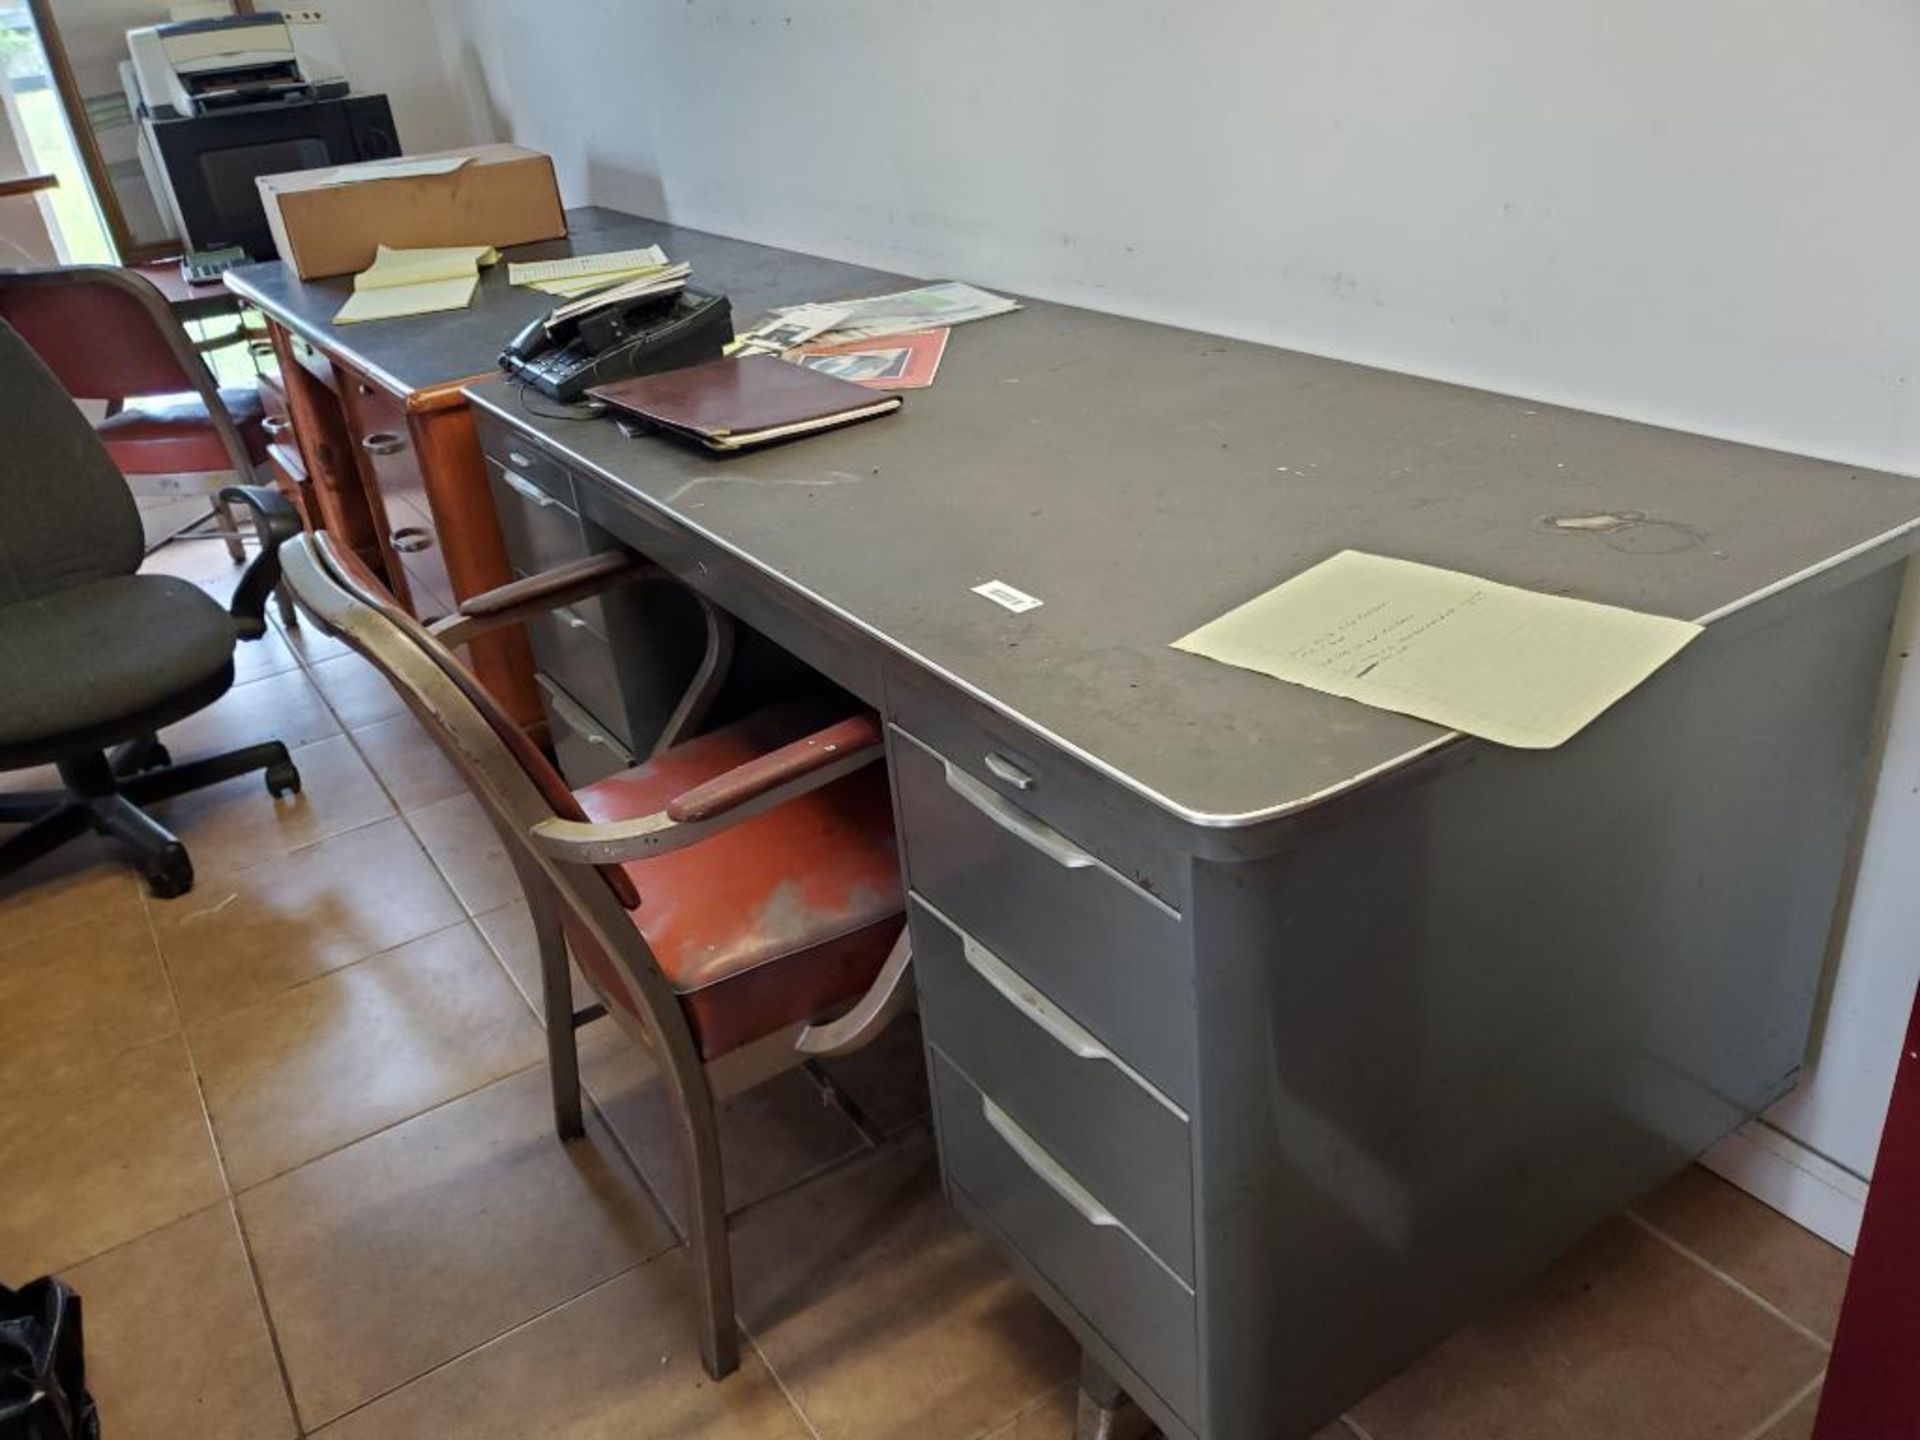 CONTENT OF OFFICE AREA: METAL BLUEPRINT FILING CABINETS, WOOD & METAL DESK, FILE CABINETS, CHAIRS, & - Image 2 of 10